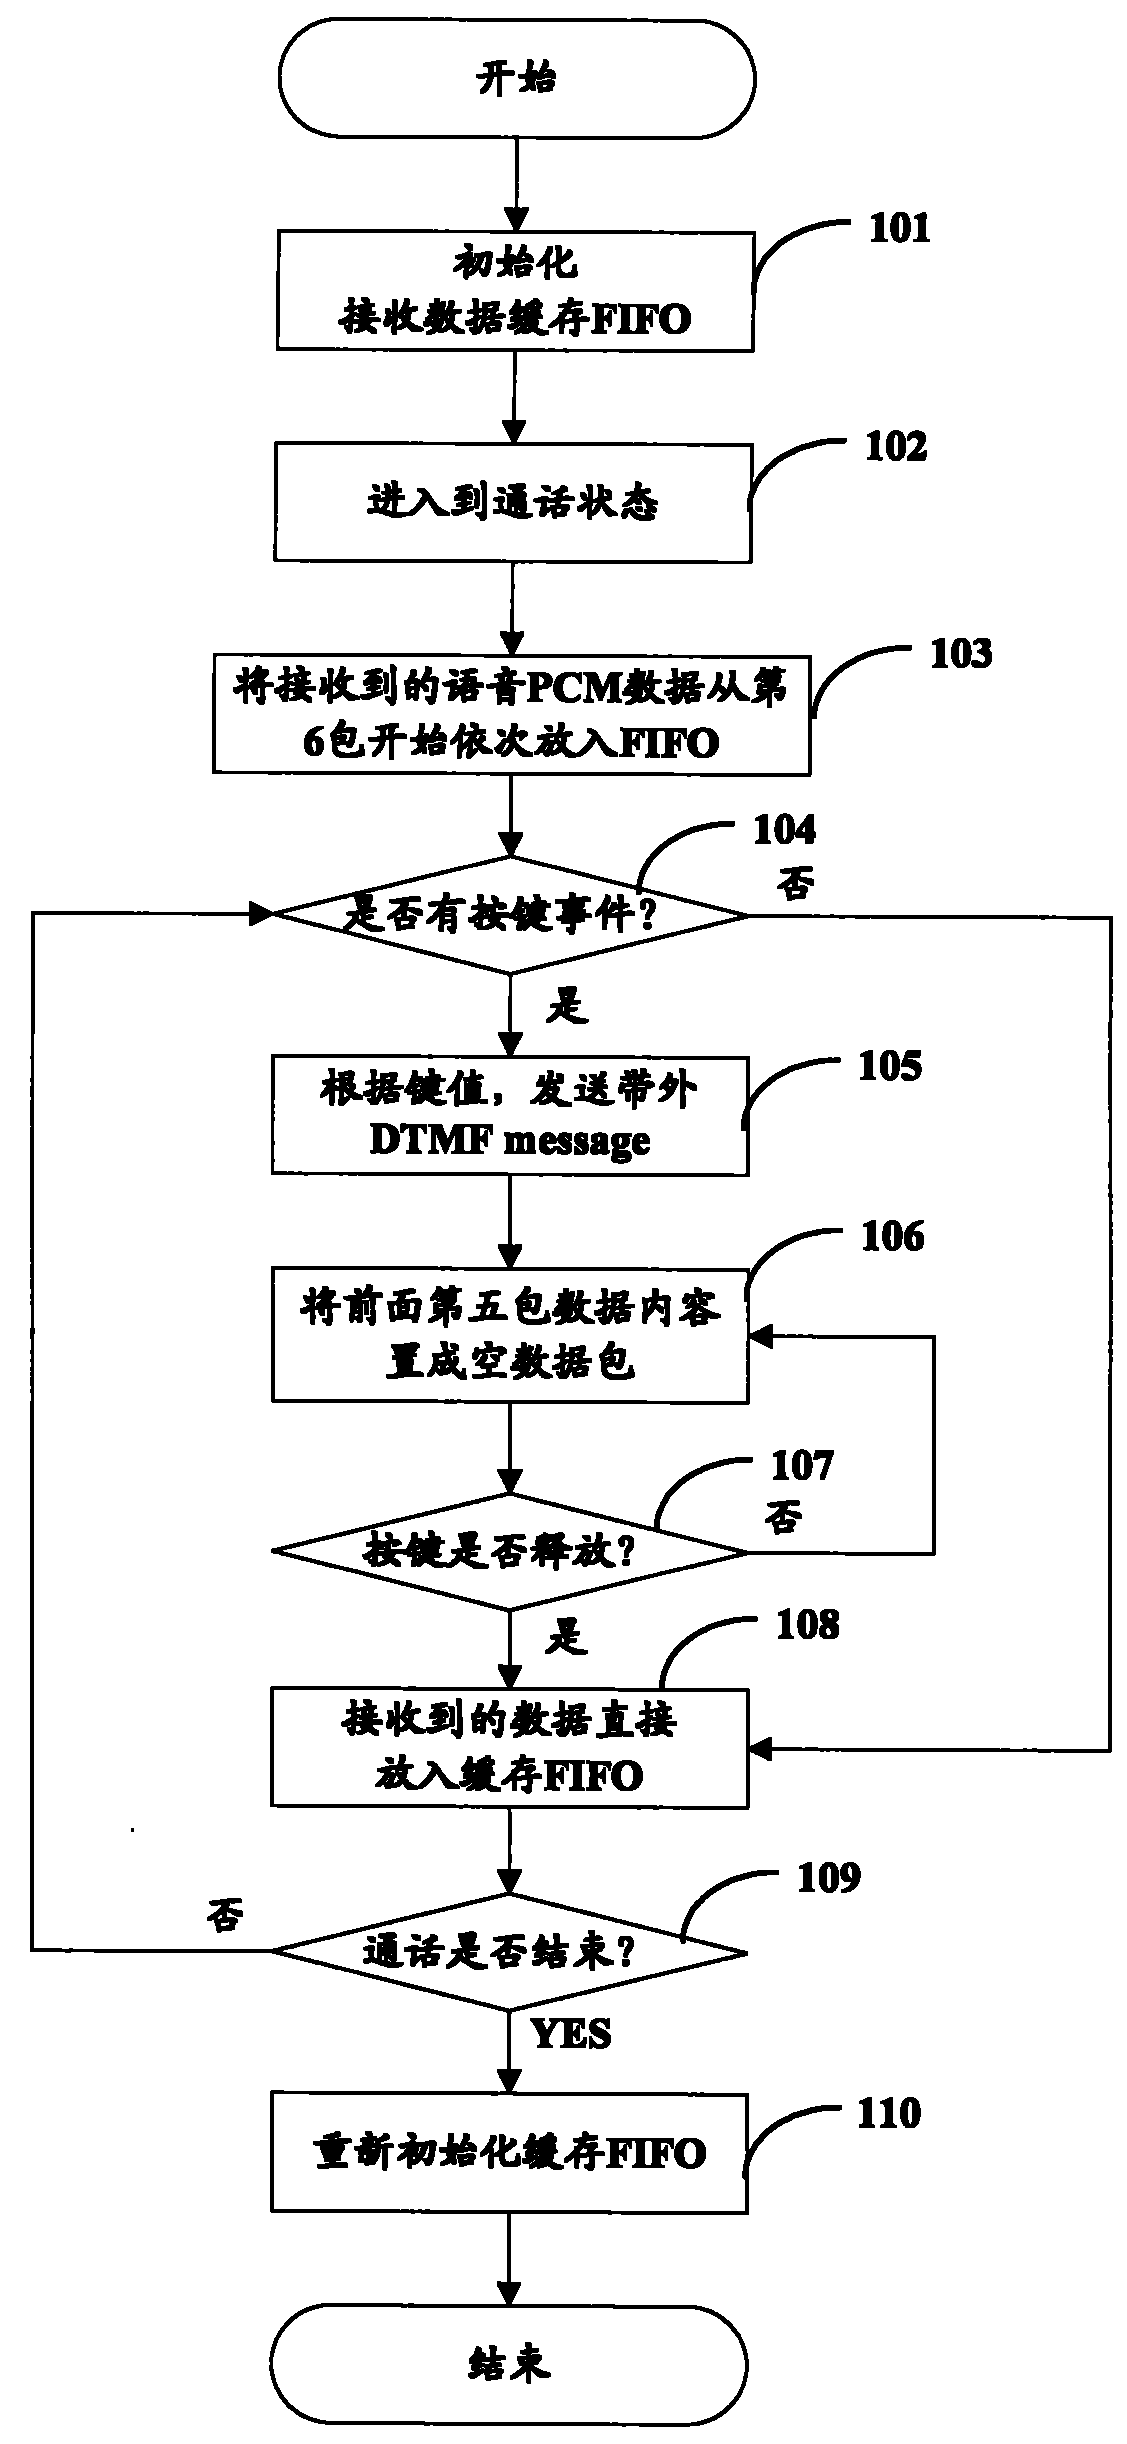 Implementing method and apparatus for shielding DTMF sound of outer telephone